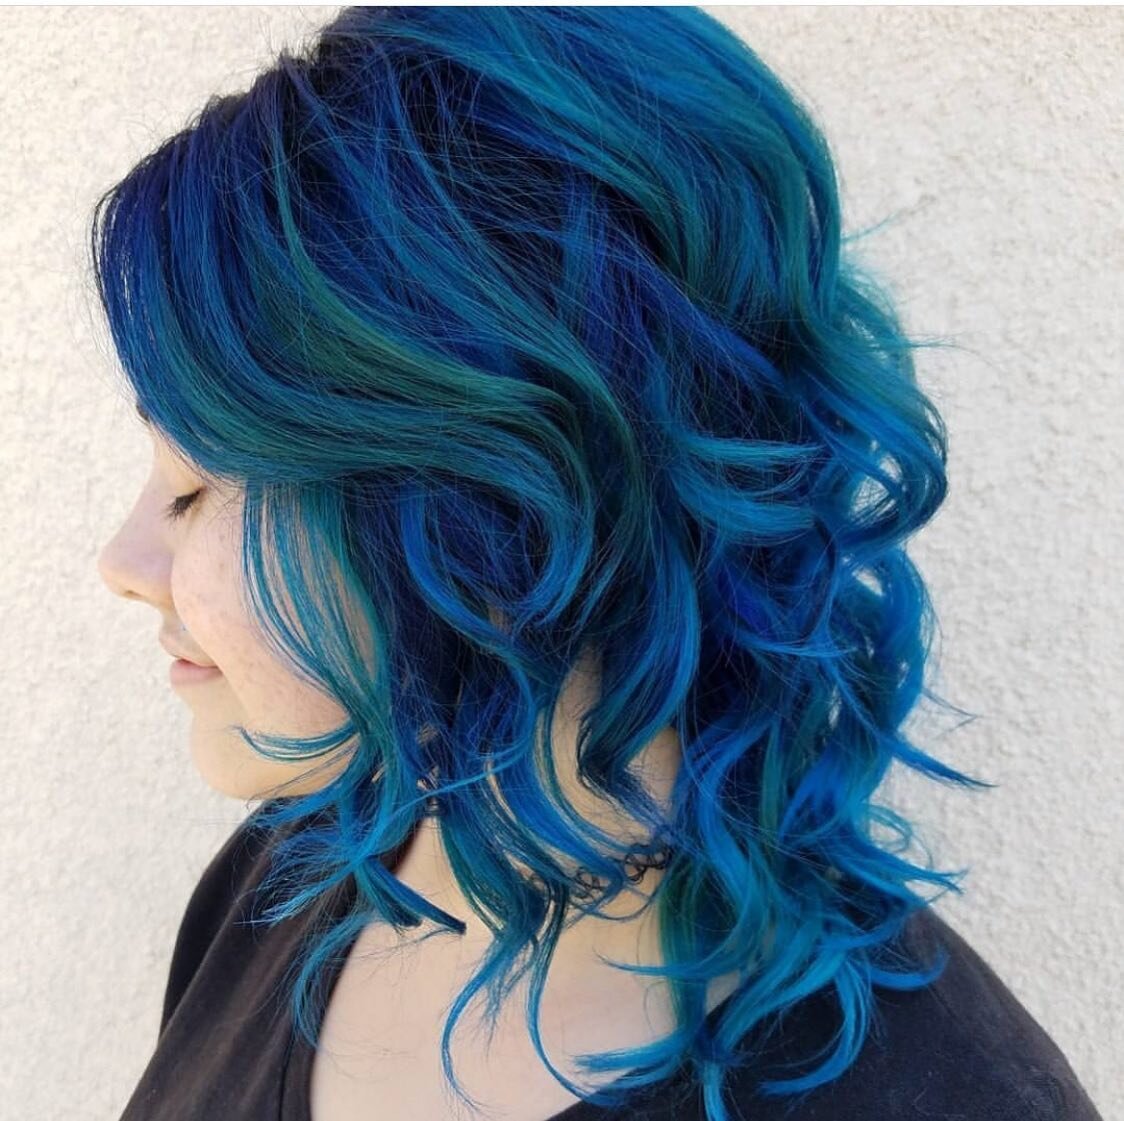 Vibrant colors are never a miss at Le Reve 💙
.
.
.
Click the link in our bio to book your next appointment 😎⁠
⁠
Be Creative | Be Different⁠
Live Le R&ecirc;ve, Live The Dream⁠
⁠
(818) 923-5005⁠
18000 Chatsworth St.⁠
Granada Hills, CA 91344⁠
www.ler